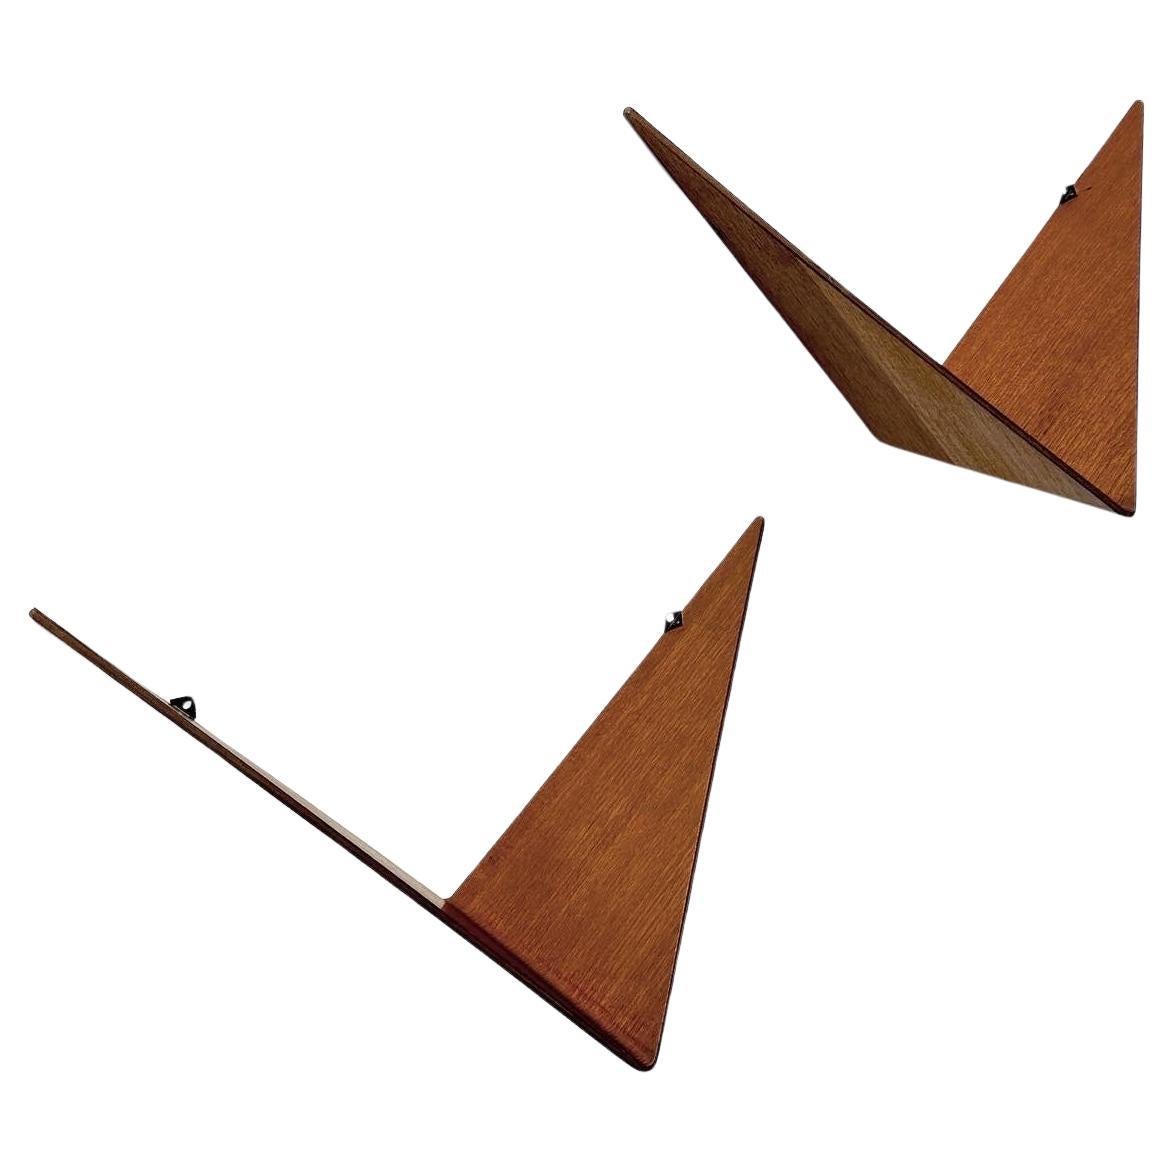 Rare pair of Poul Cadovius Butterfly Shelves, designed in 1958 and manufactured by Royal System in Denmark.

Made of delicate moulded teak plywood and two small metal hooks to mount with nails or screws. 
These look beautiful as a small bedside